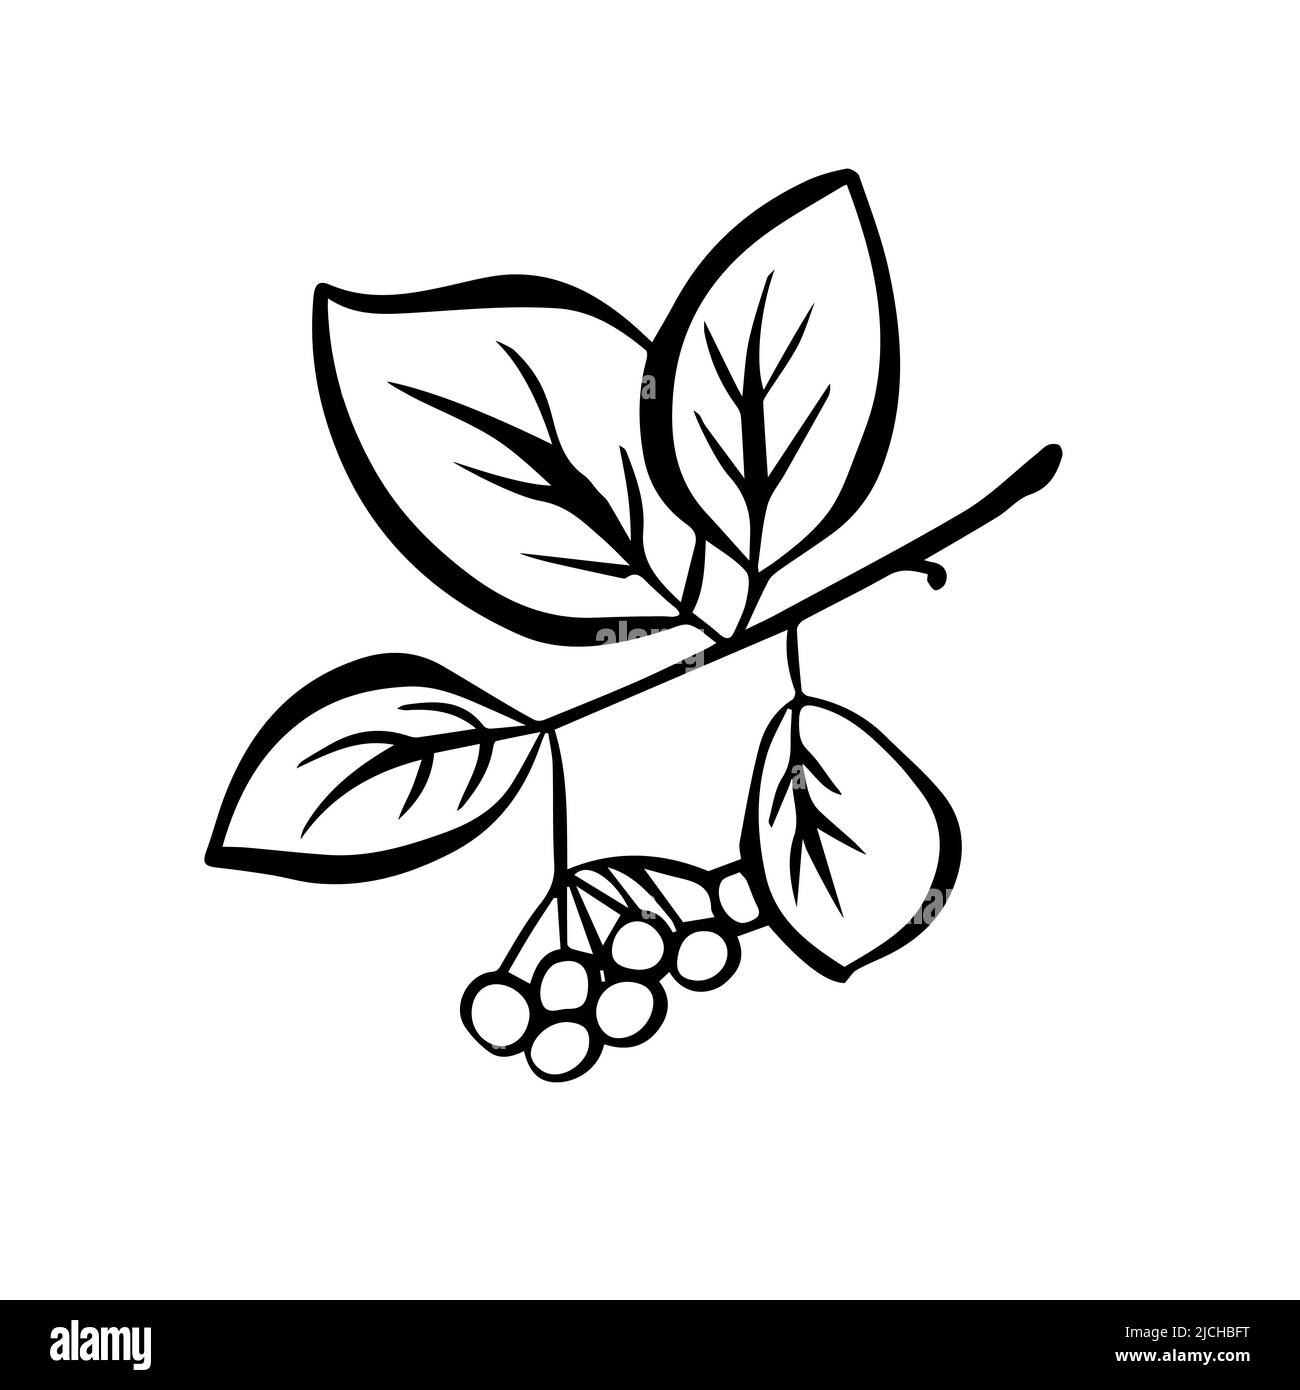 Contour drawing of a rowan twig with berries. Doodle style. Vector Stock Vector